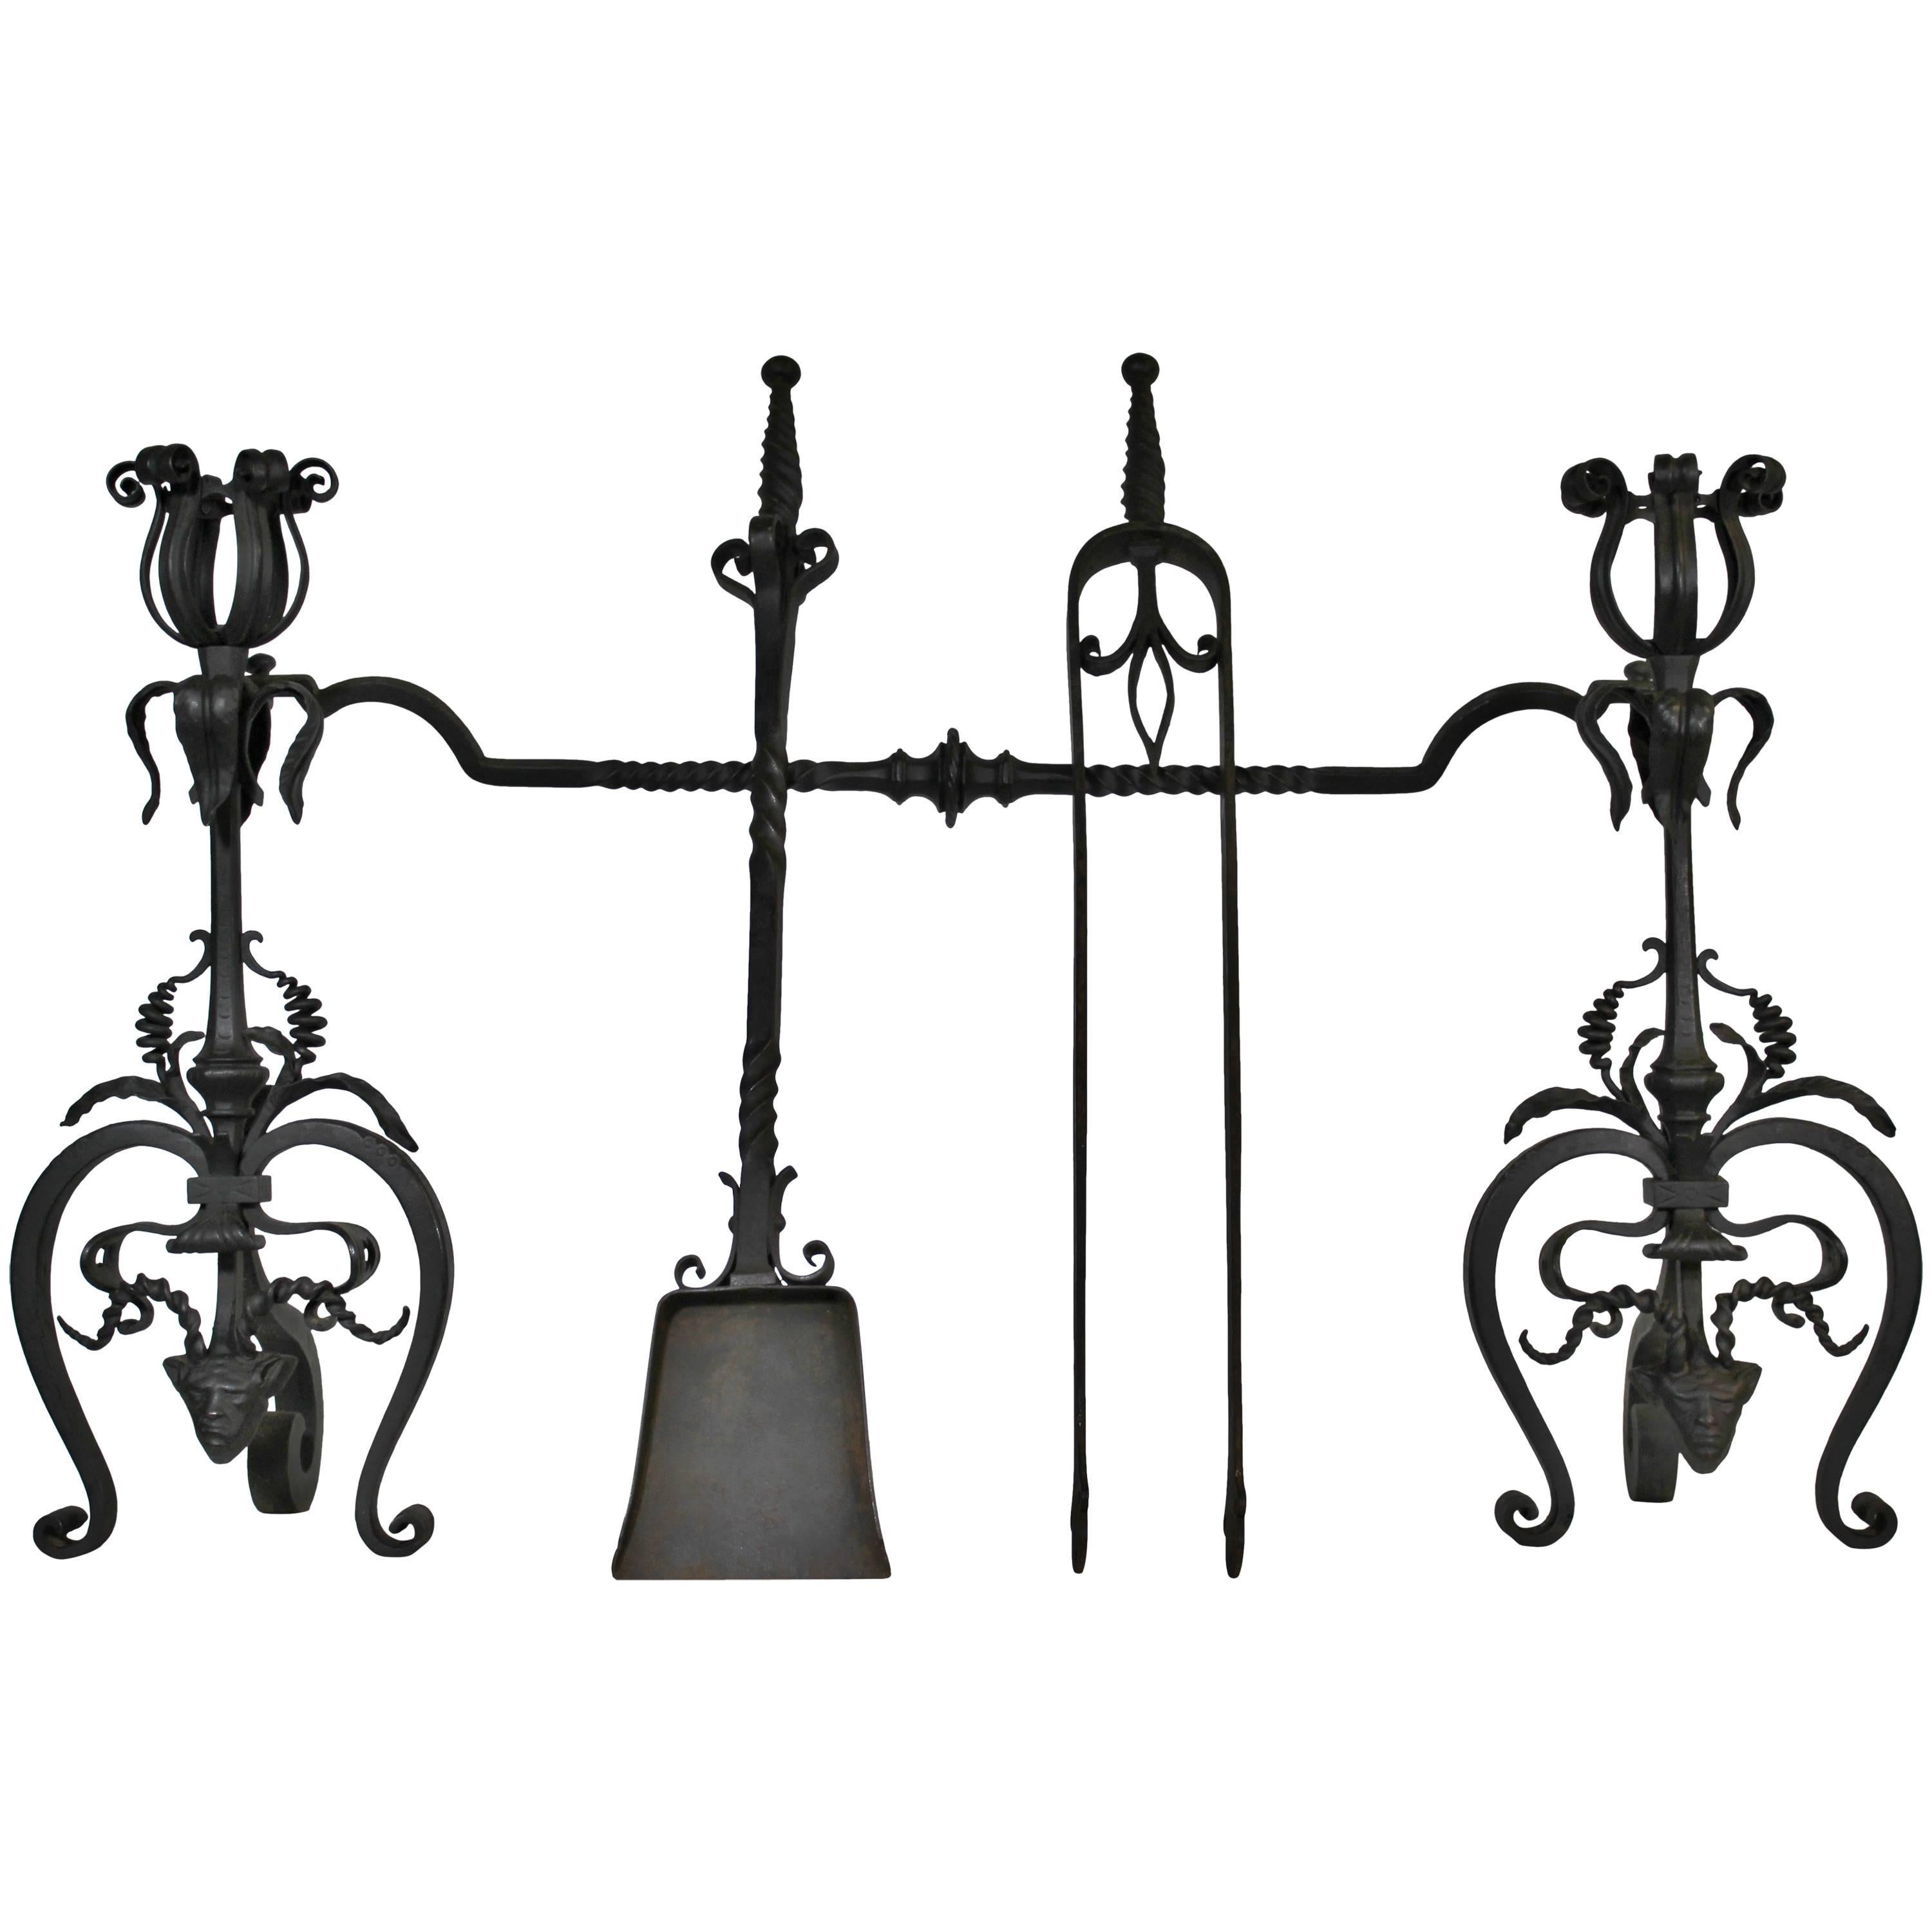 Pair of Gothic Revival Wrought Iron Andirons with Figural Horned Devils